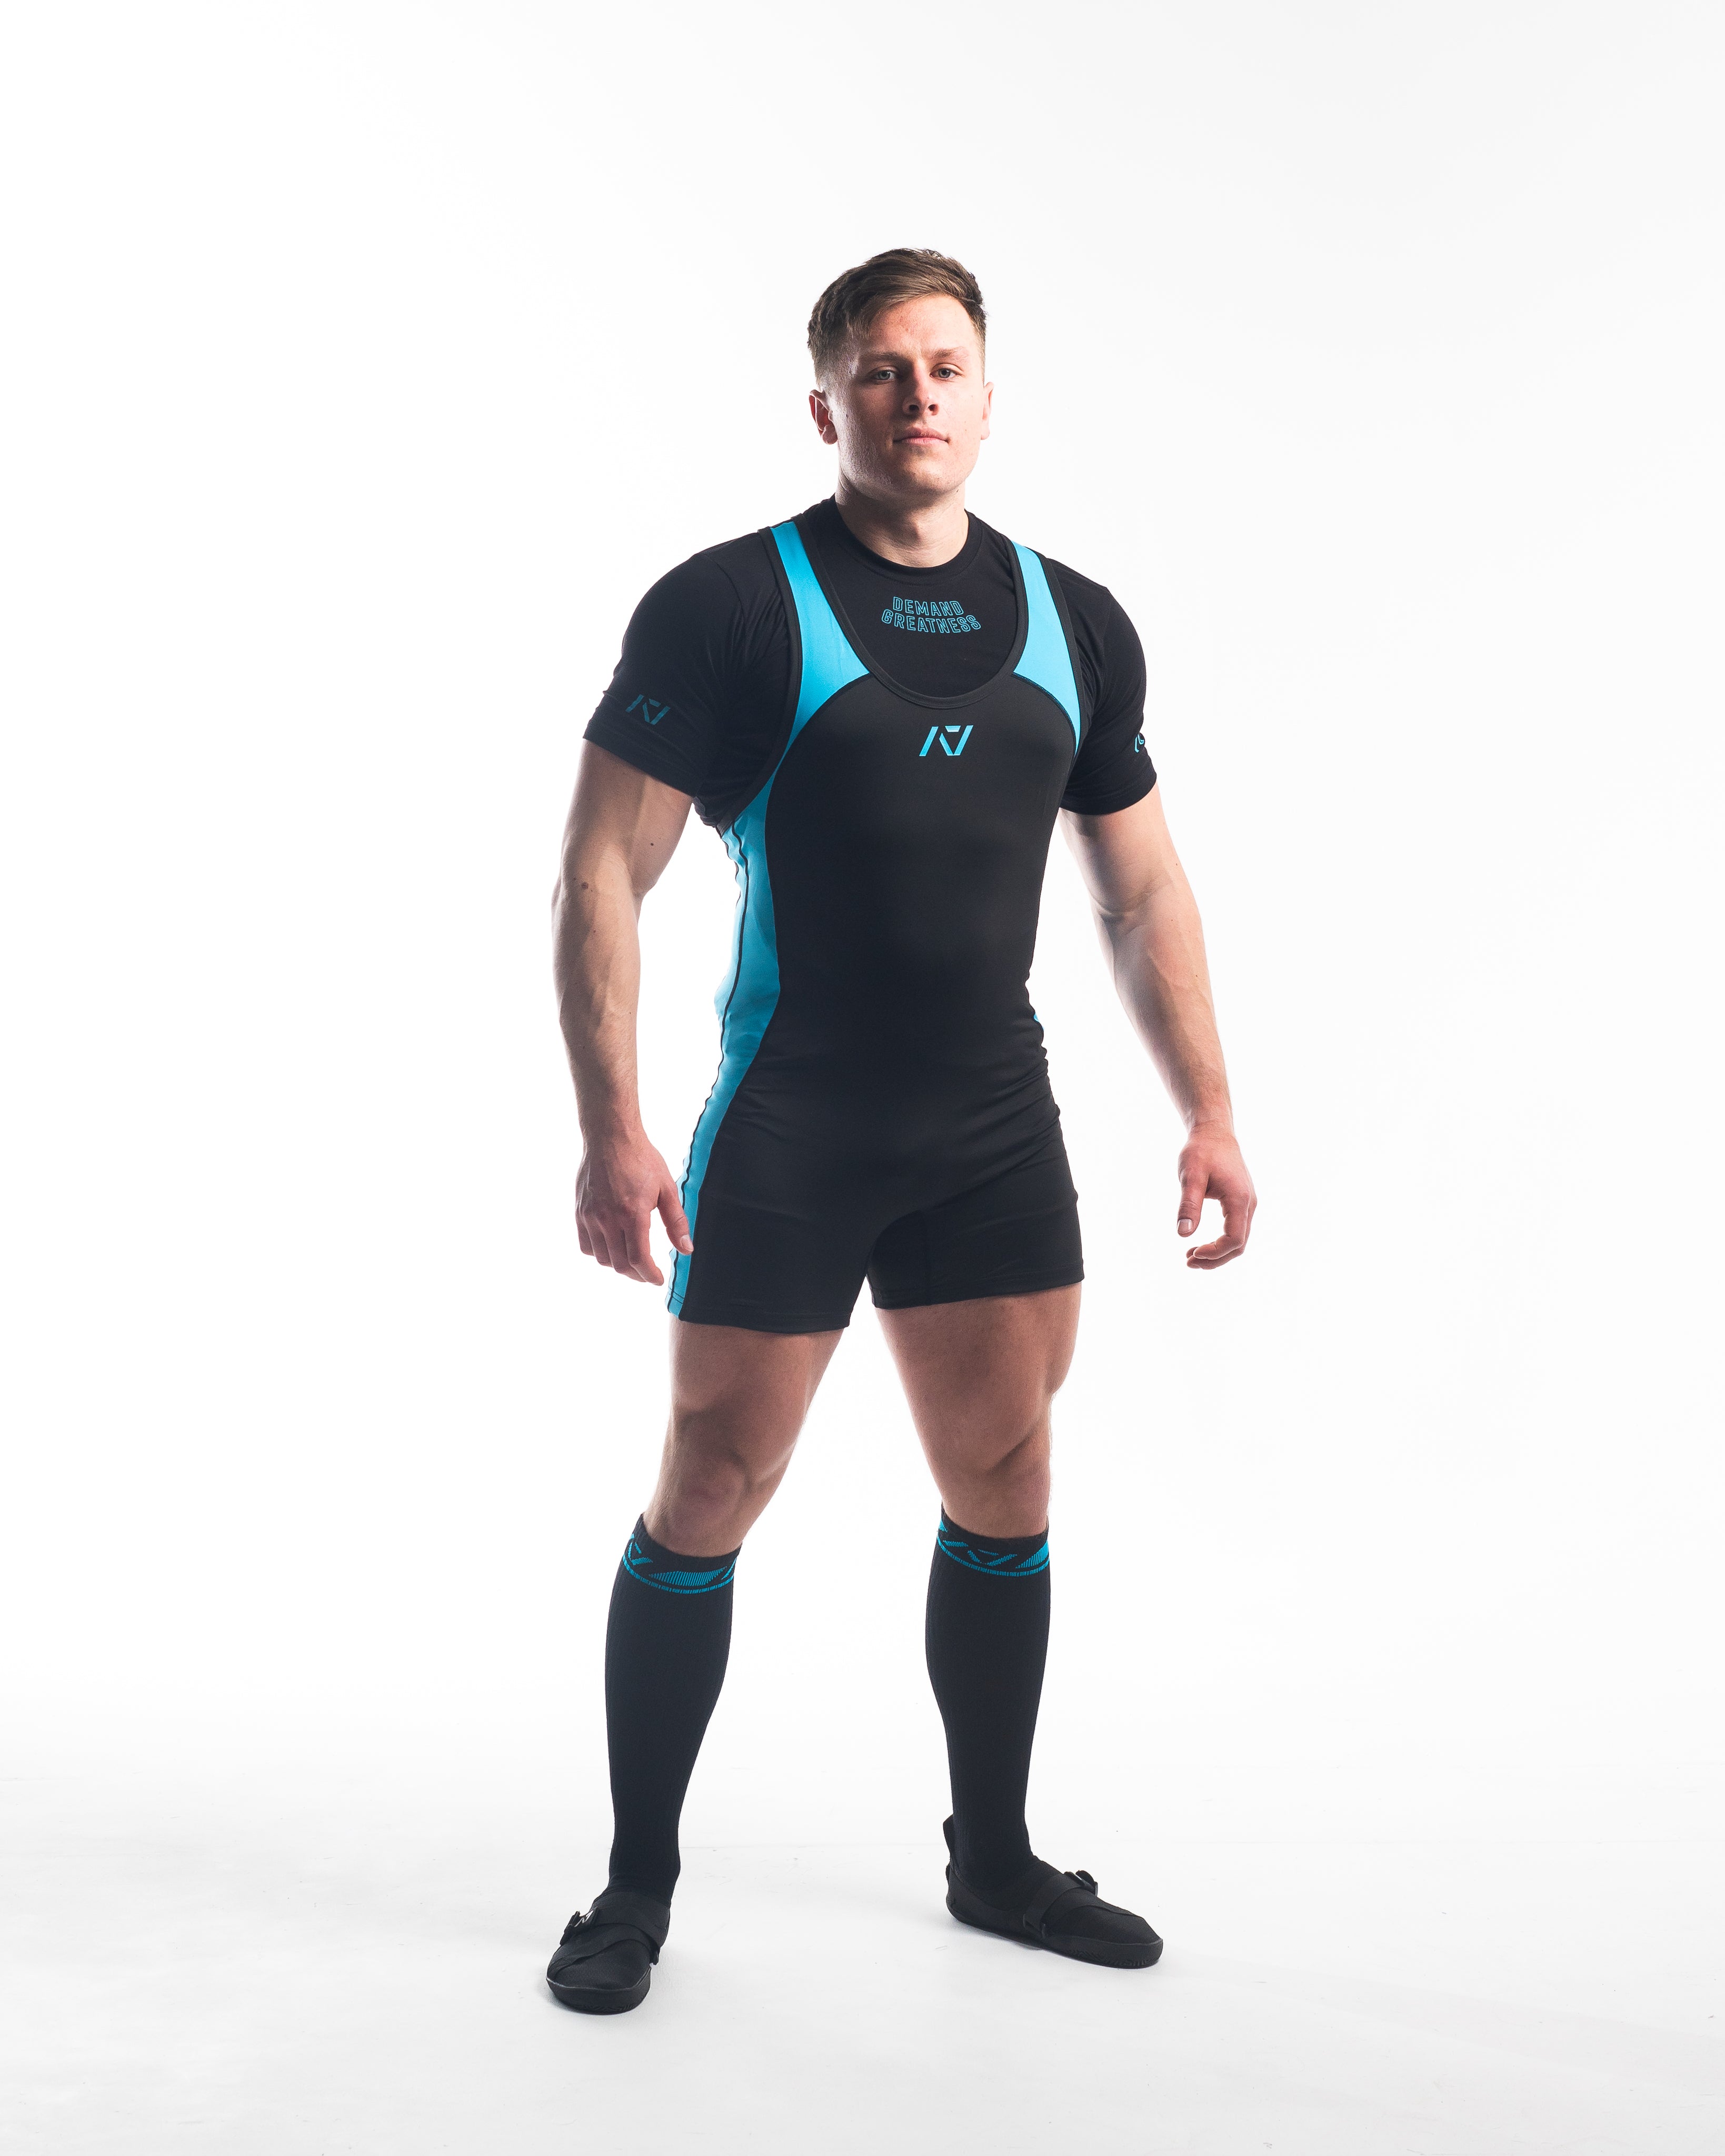 A7 IPF Approved Azul Luno singlet features extra lat mobility, side panel stitching to guide the squat depth level and curved panel design for a slimming look. The Women's cut singlet features a tapered waist and additional quad room. The IPF Approved Kit includes Luno Powerlifting Singlet, A7 Meet Shirt, A7 Deadlift Socks, Hourglass Knee Sleeves (Stiff Knee Sleeves and Rigor Mortis Knee Sleeves). All A7 Powerlifting Equipment shipping to UK, Norway, Switzerland and Iceland.